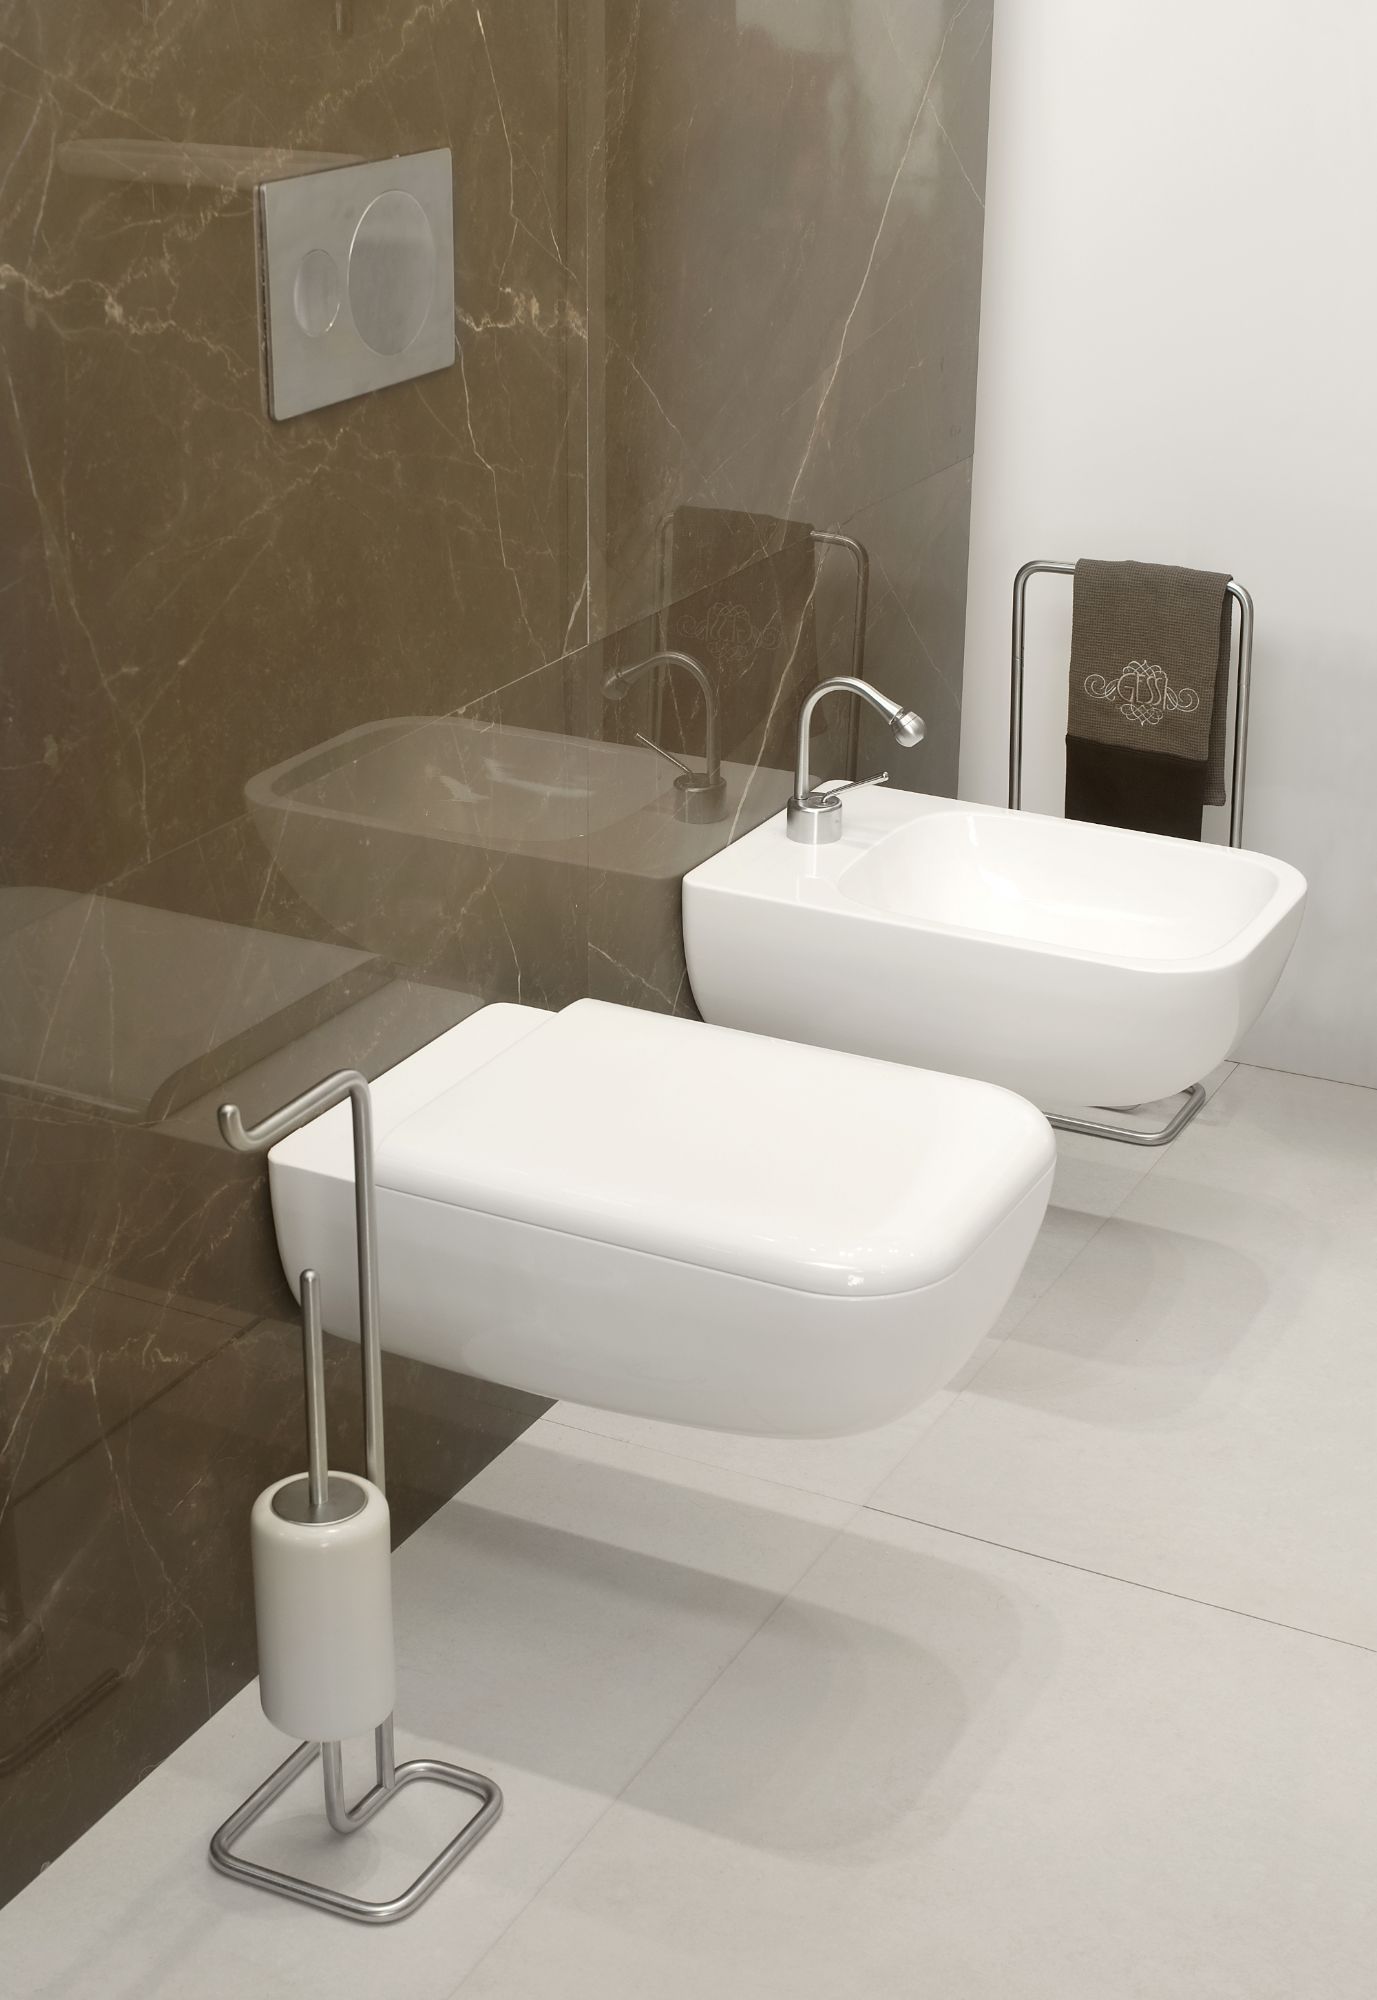 Gessi Goccia toilet and seat, available at C.P. Hart